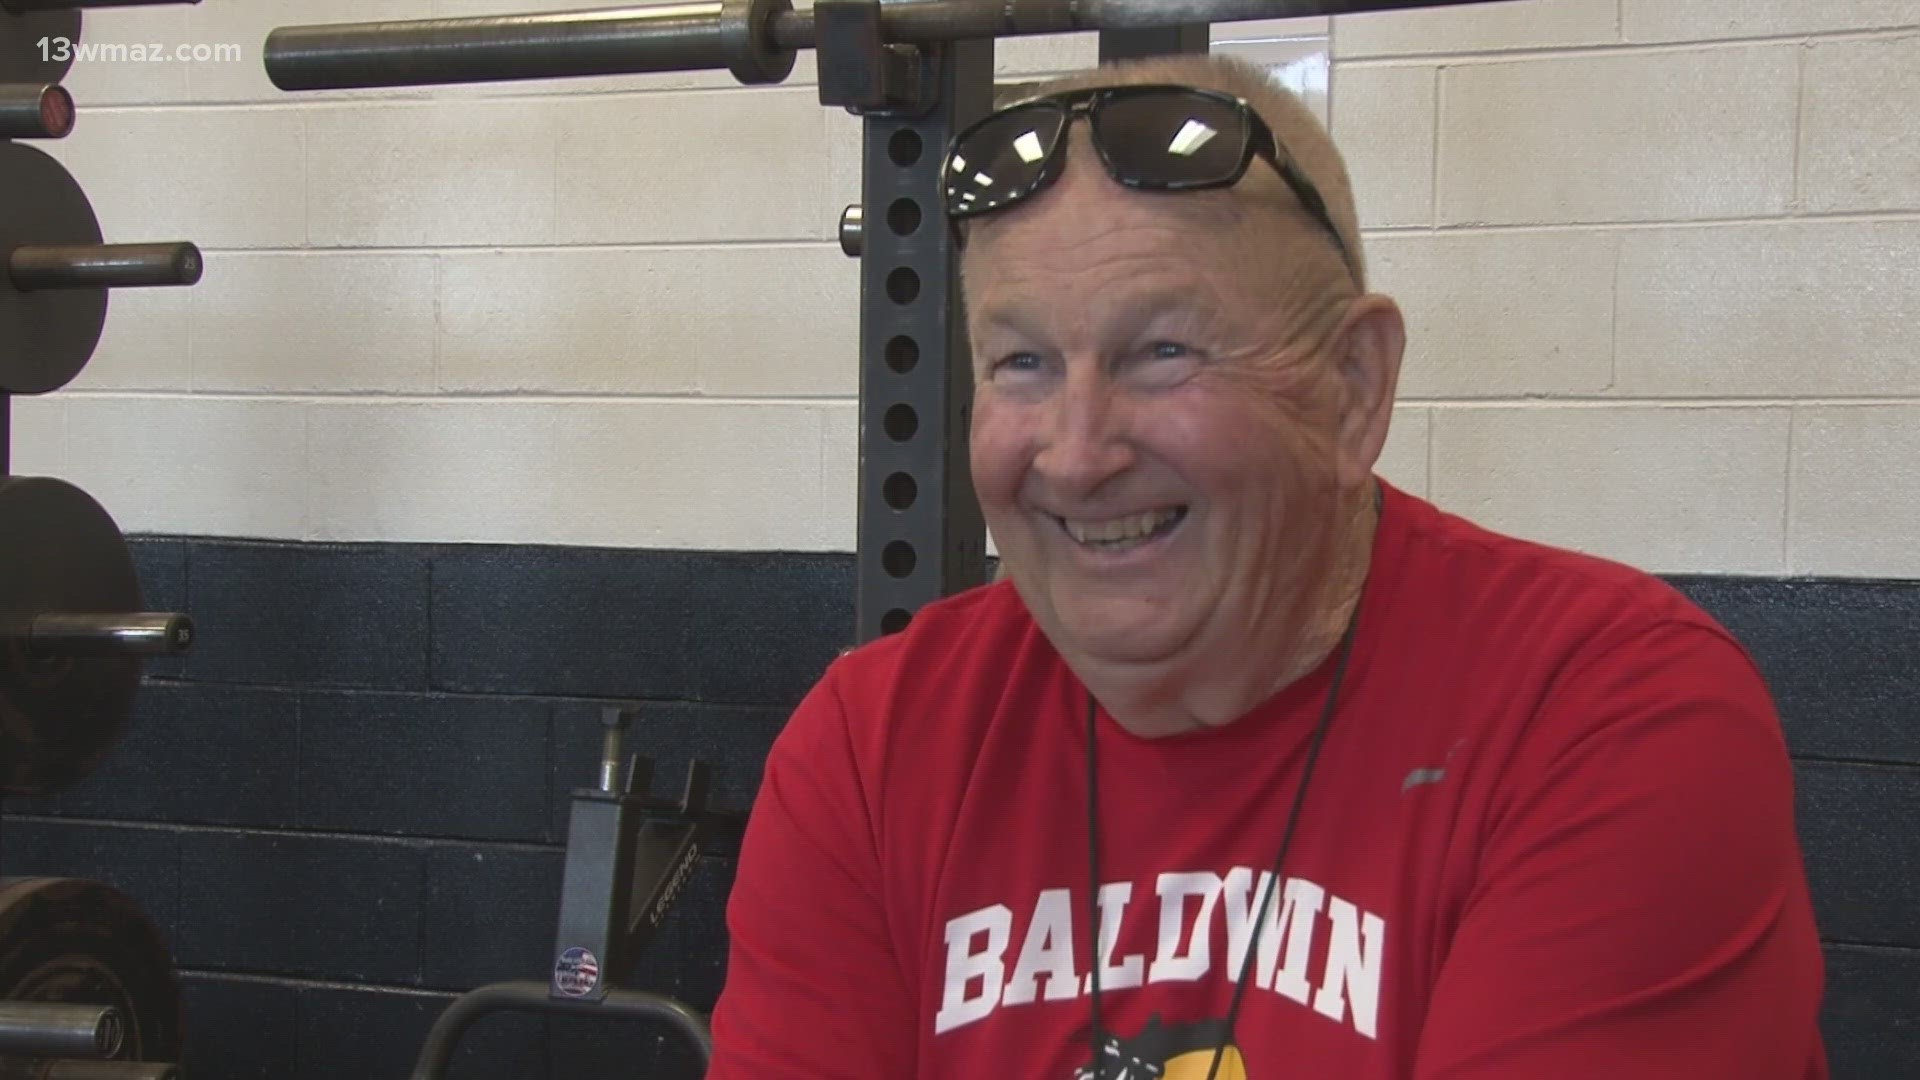 Coach Cornett, 75, has made stops at Westside, Central and Macon County. But he still is coach after 60 years.